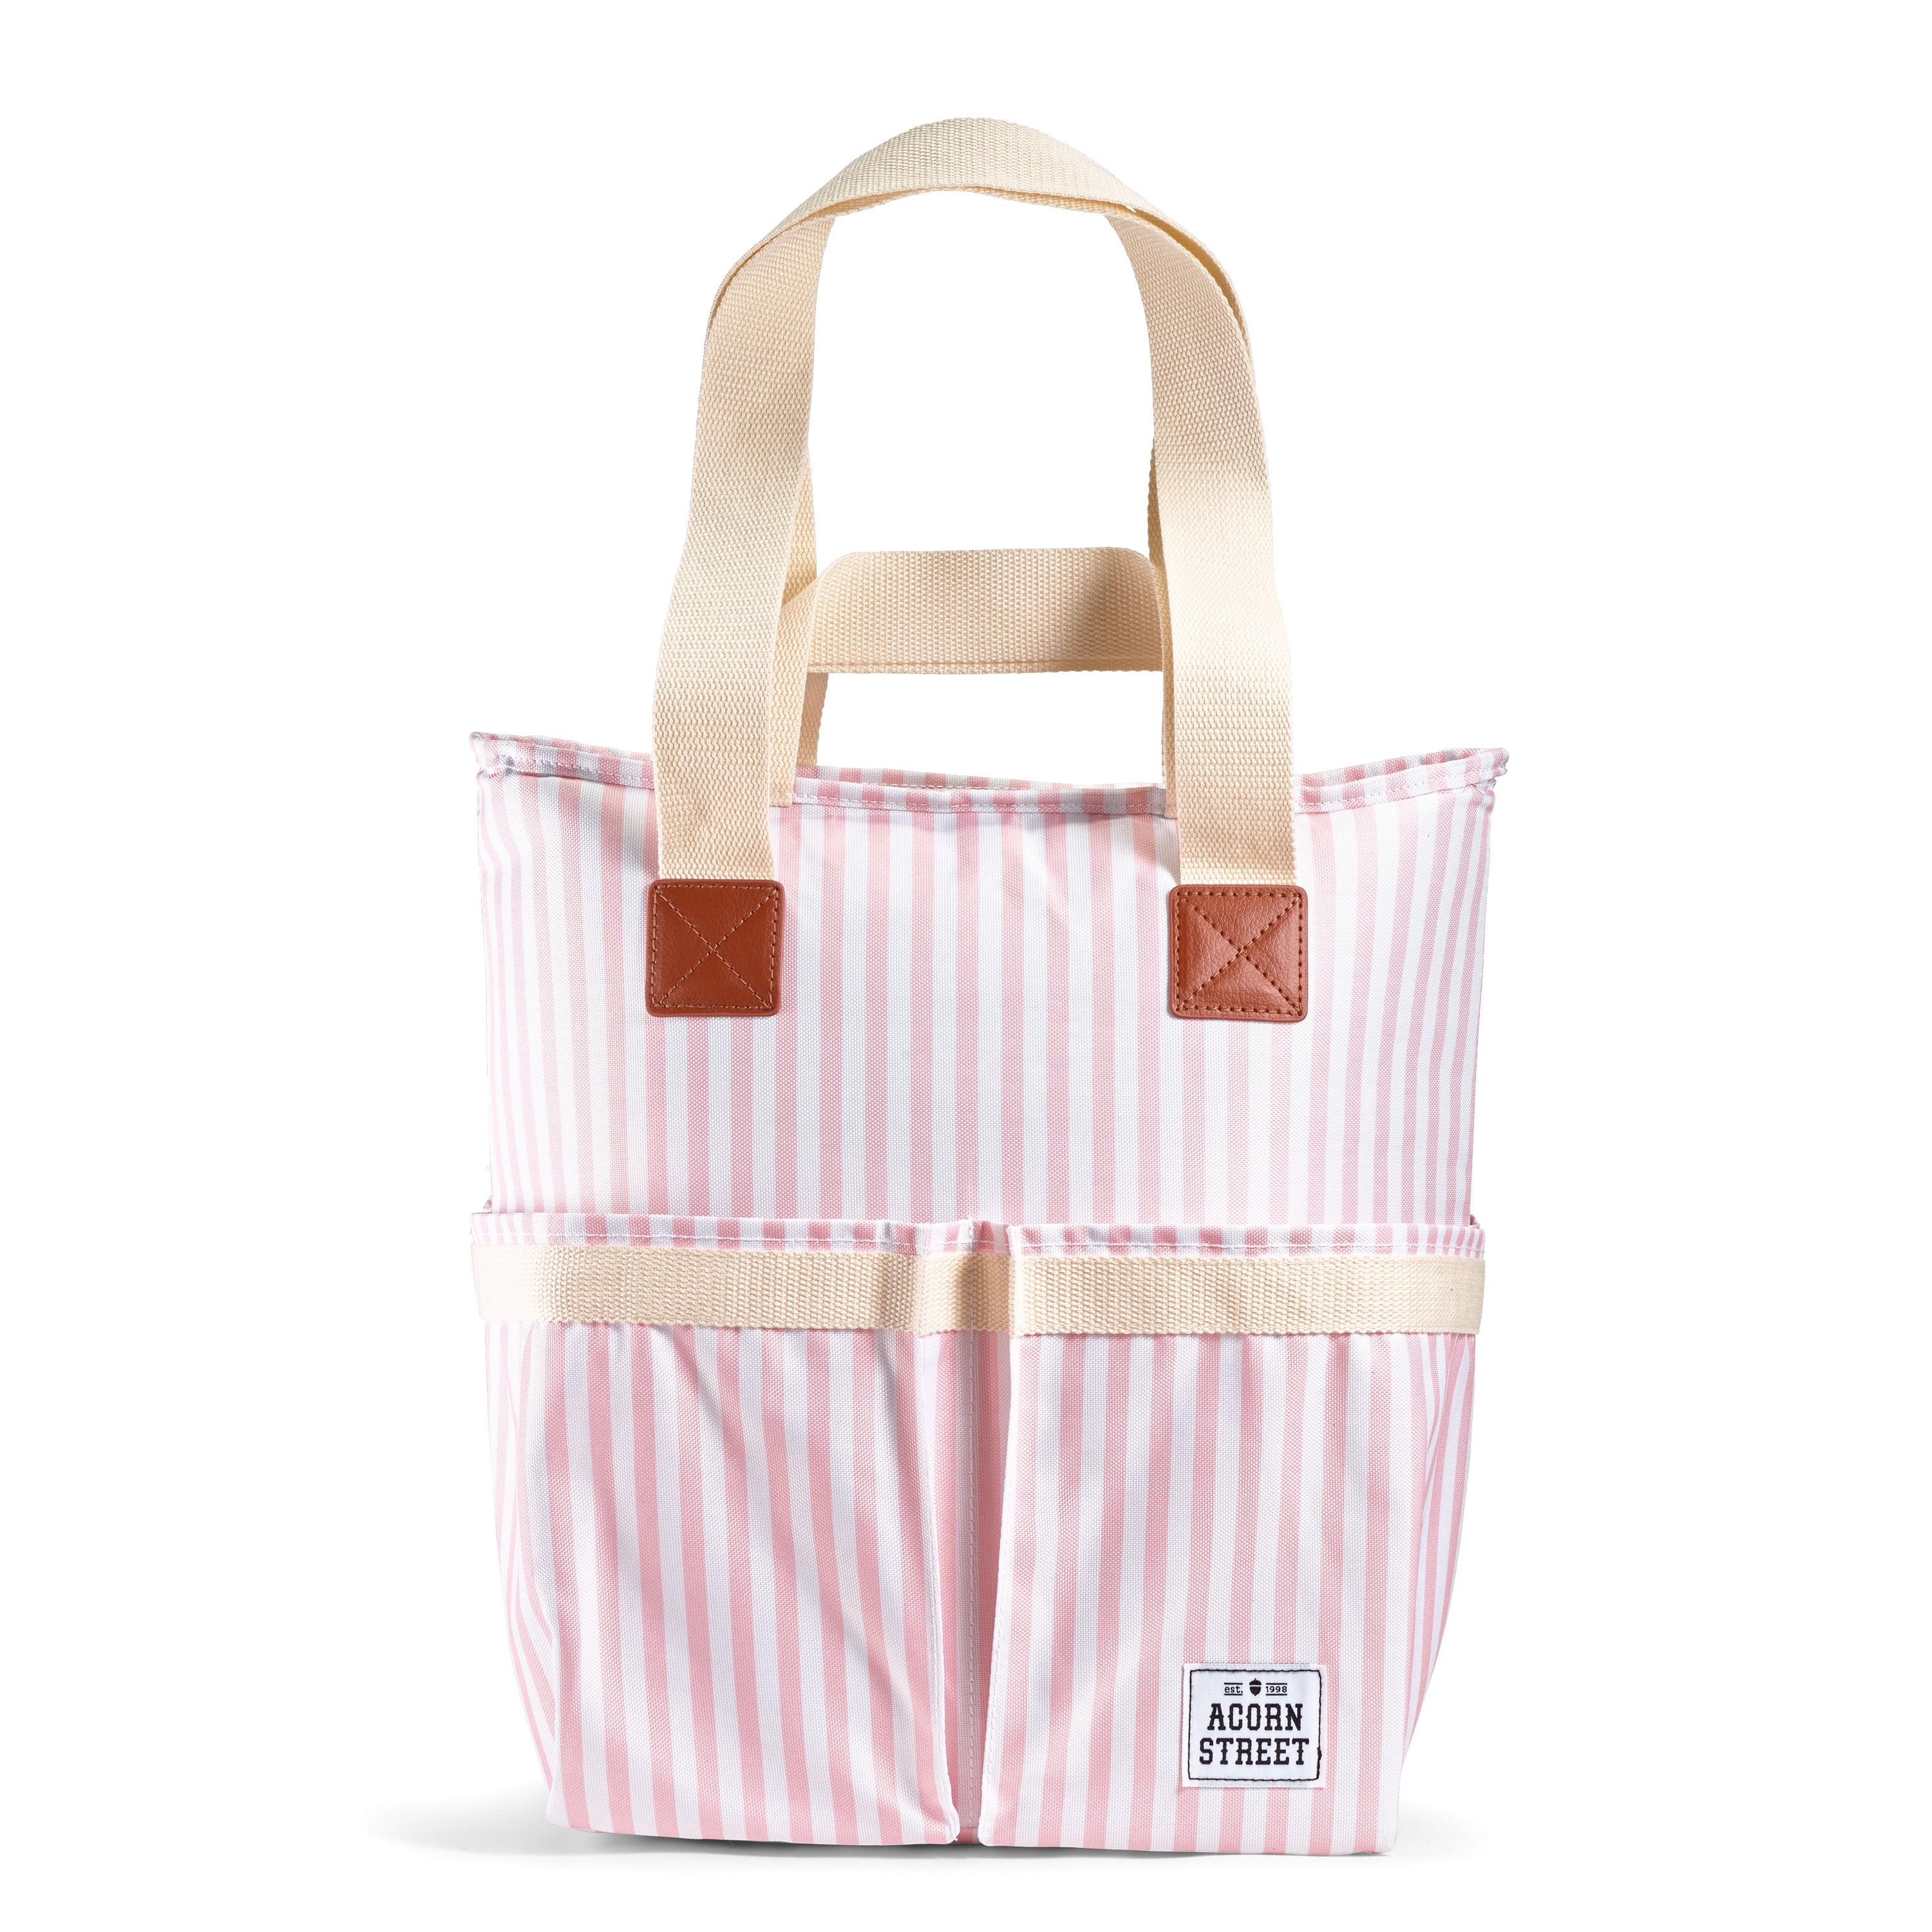 Acorn Street Insulated Wine Cooler Tote Bag with Removable Divider in Pink Vineyard Stripe